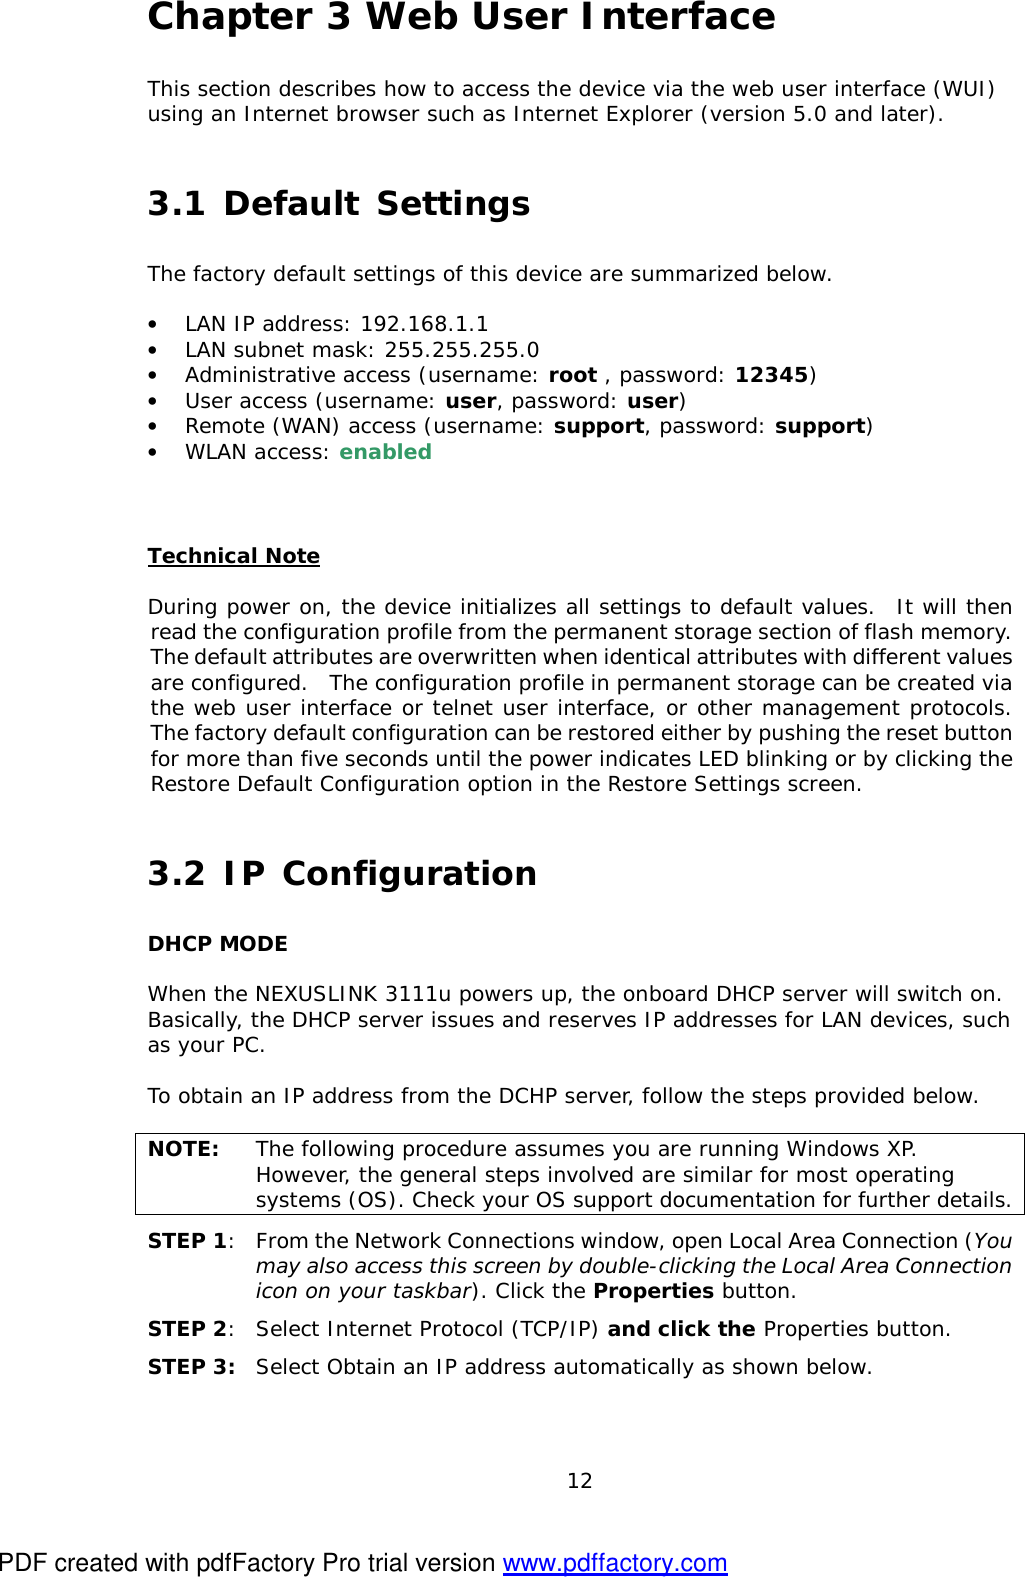  12 Chapter 3 Web User Interface This section describes how to access the device via the web user interface (WUI) using an Internet browser such as Internet Explorer (version 5.0 and later).   3.1 Default Settings The factory default settings of this device are summarized below.  •  LAN IP address: 192.168.1.1 •  LAN subnet mask: 255.255.255.0 •  Administrative access (username: root , password: 12345) •  User access (username: user, password: user) •  Remote (WAN) access (username: support, password: support) •  WLAN access: enabled   Technical Note  During power on, the device initializes all settings to default values.  It will then read the configuration profile from the permanent storage section of flash memory.  The default attributes are overwritten when identical attributes with different values are configured.  The configuration profile in permanent storage can be created via the web user interface or telnet user interface, or other management protocols.  The factory default configuration can be restored either by pushing the reset button for more than five seconds until the power indicates LED blinking or by clicking the Restore Default Configuration option in the Restore Settings screen. 3.2 IP Configuration DHCP MODE  When the NEXUSLINK 3111u powers up, the onboard DHCP server will switch on. Basically, the DHCP server issues and reserves IP addresses for LAN devices, such as your PC.  To obtain an IP address from the DCHP server, follow the steps provided below.    NOTE:  The following procedure assumes you are running Windows XP.  However, the general steps involved are similar for most operating systems (OS). Check your OS support documentation for further details. STEP 1:  From the Network Connections window, open Local Area Connection (You may also access this screen by double-clicking the Local Area Connection icon on your taskbar). Click the Properties button. STEP 2: Select Internet Protocol (TCP/IP) and click the Properties button.  STEP 3:  Select Obtain an IP address automatically as shown below.  PDF created with pdfFactory Pro trial version www.pdffactory.com